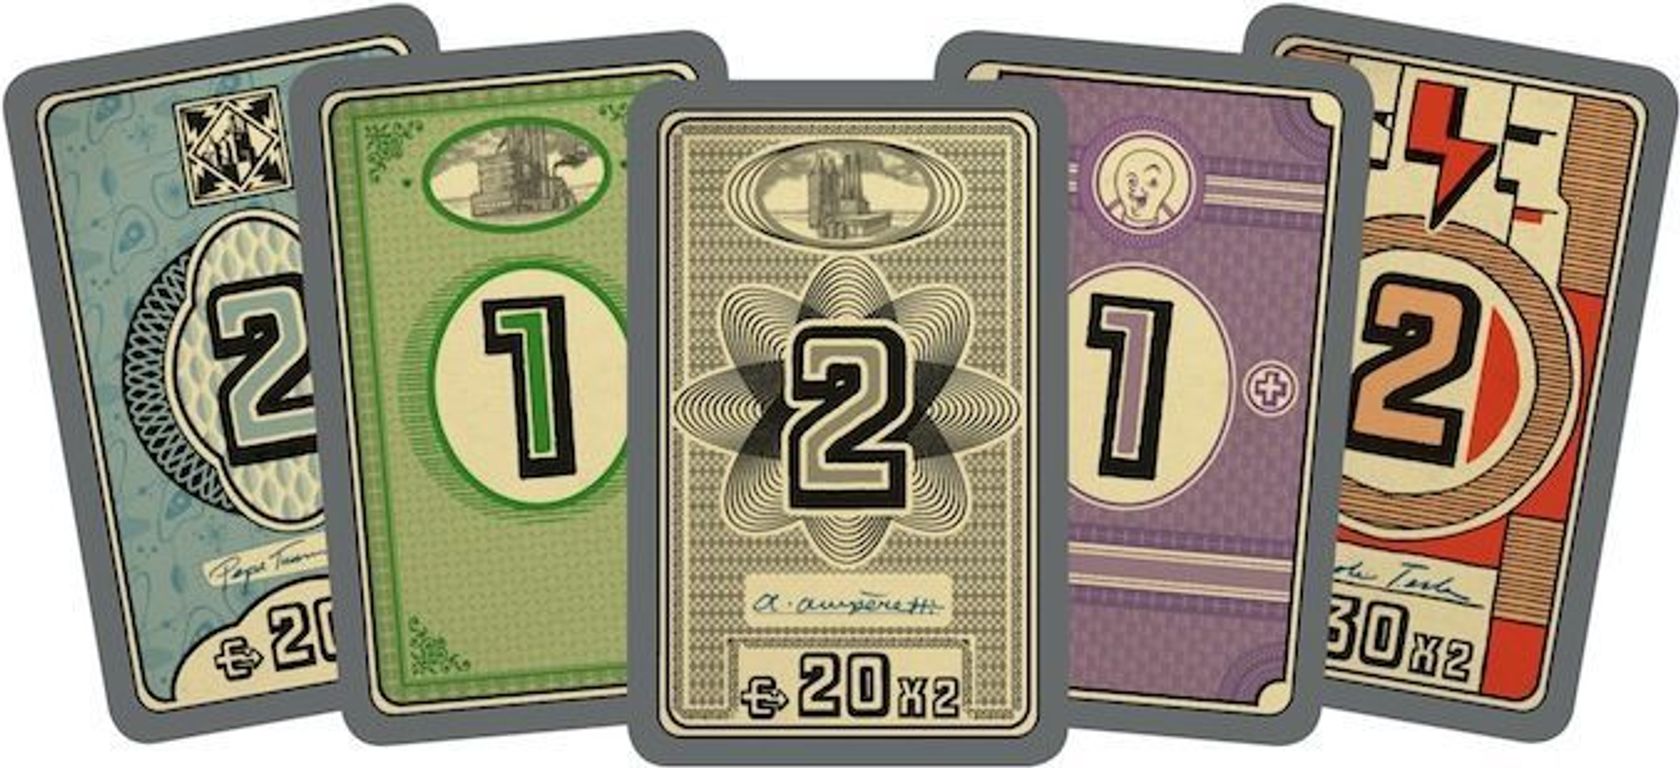 Power Grid: The Stock Companies cards